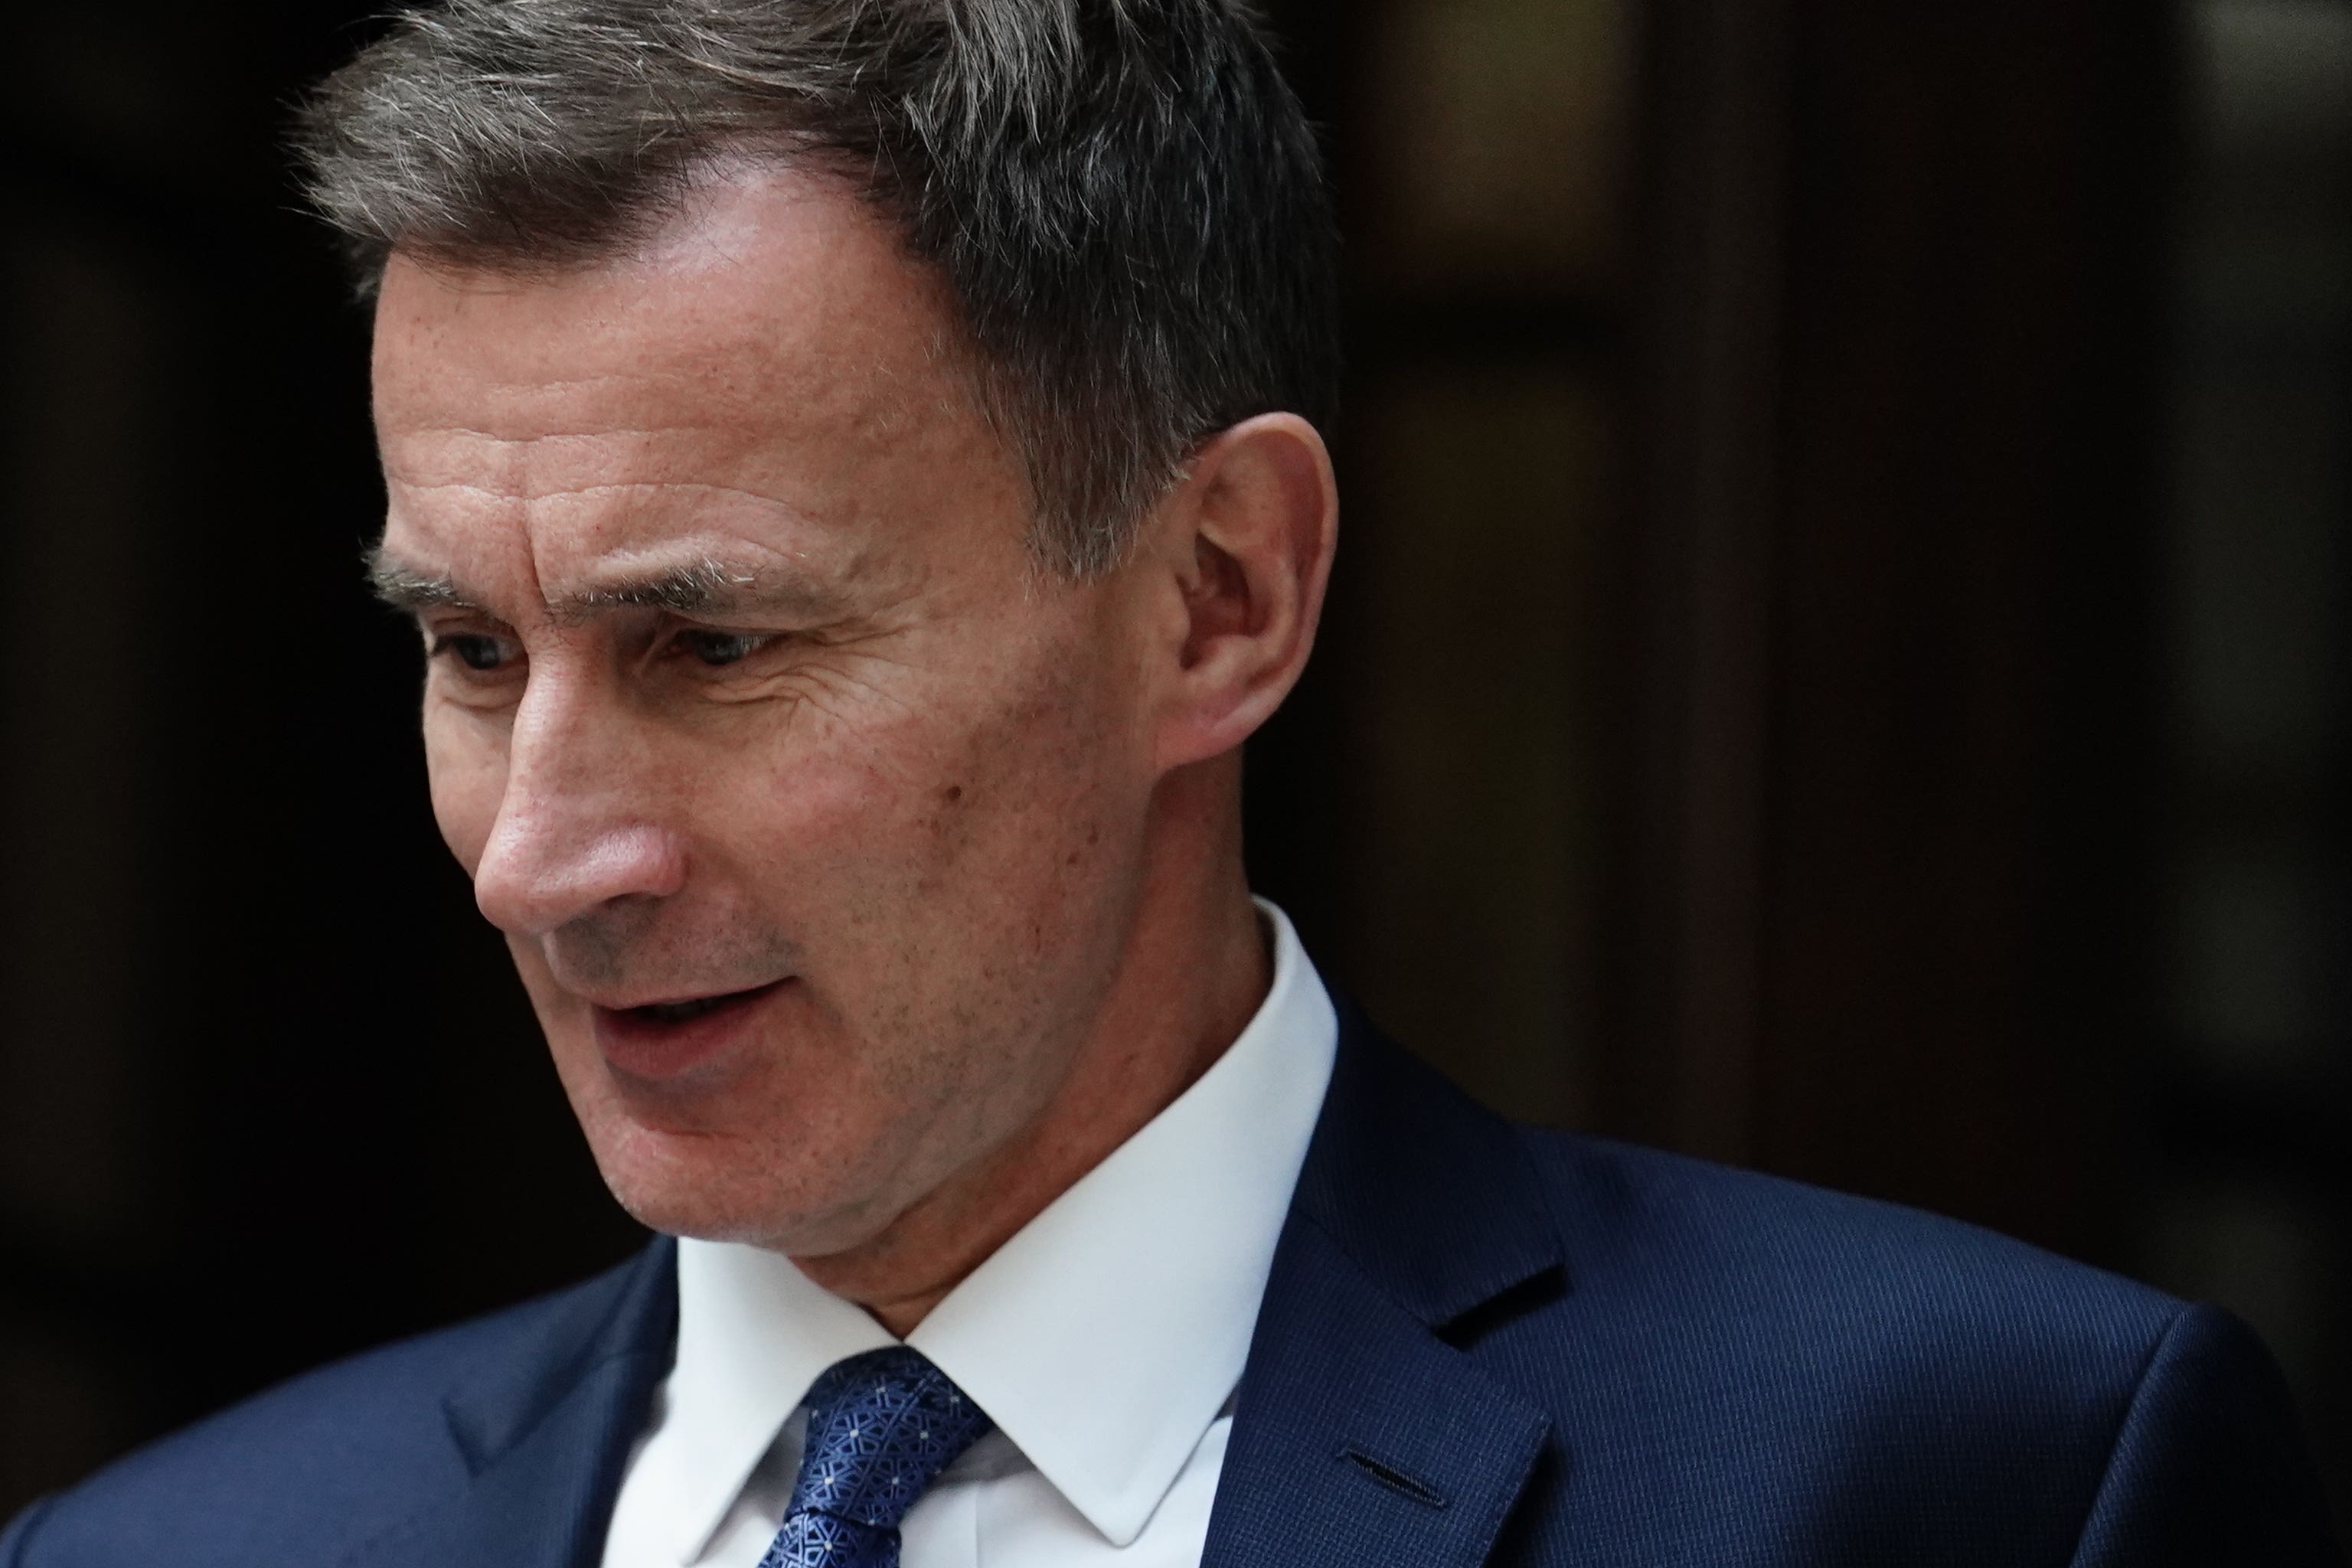 Chancellor Jeremy Hunt had only recently spoken about the disease’s impact on his family